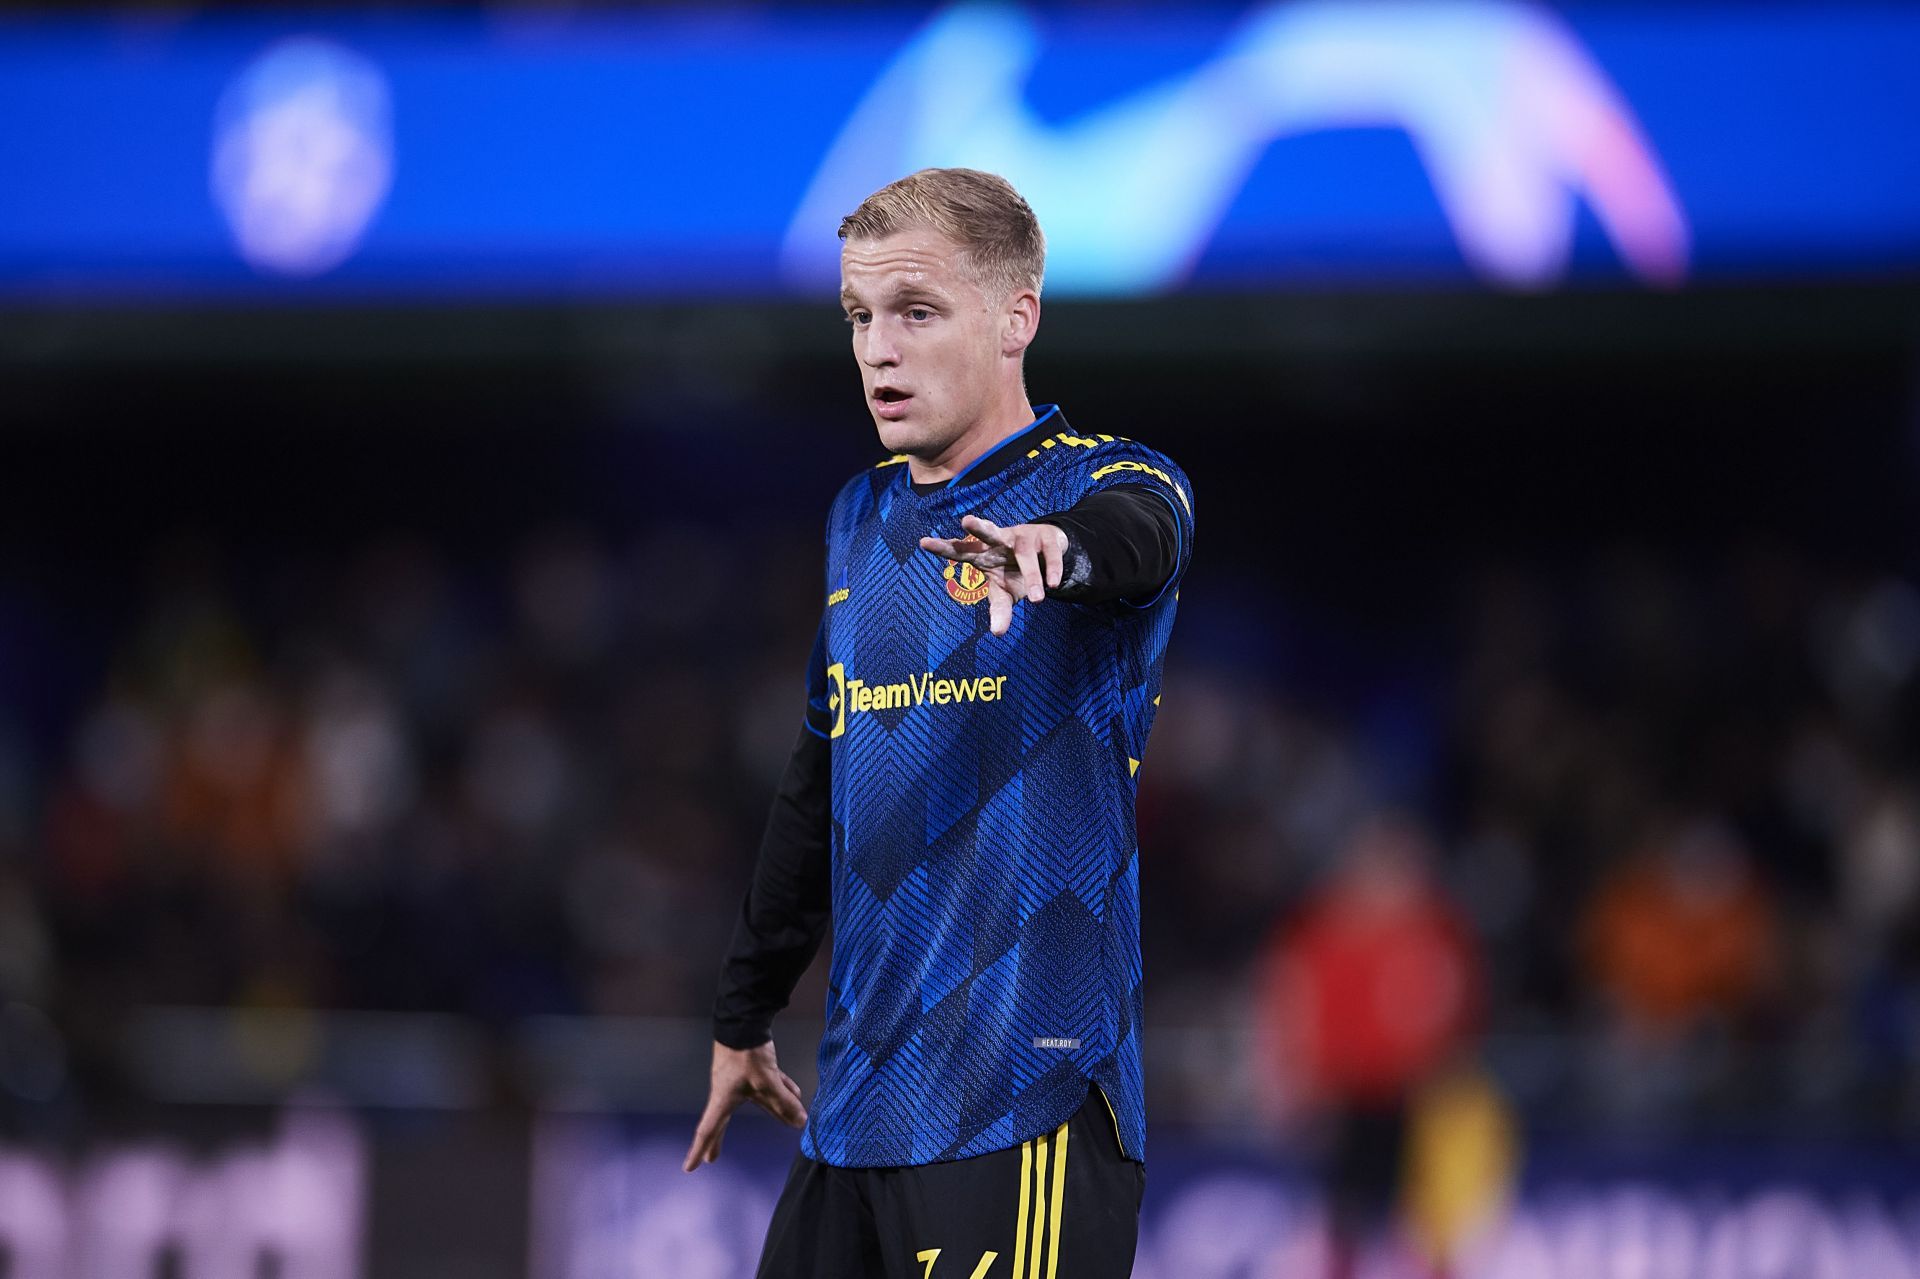 Donny van de Beek has revealed that Frank Lampard played a big part in his decision to join Everton.